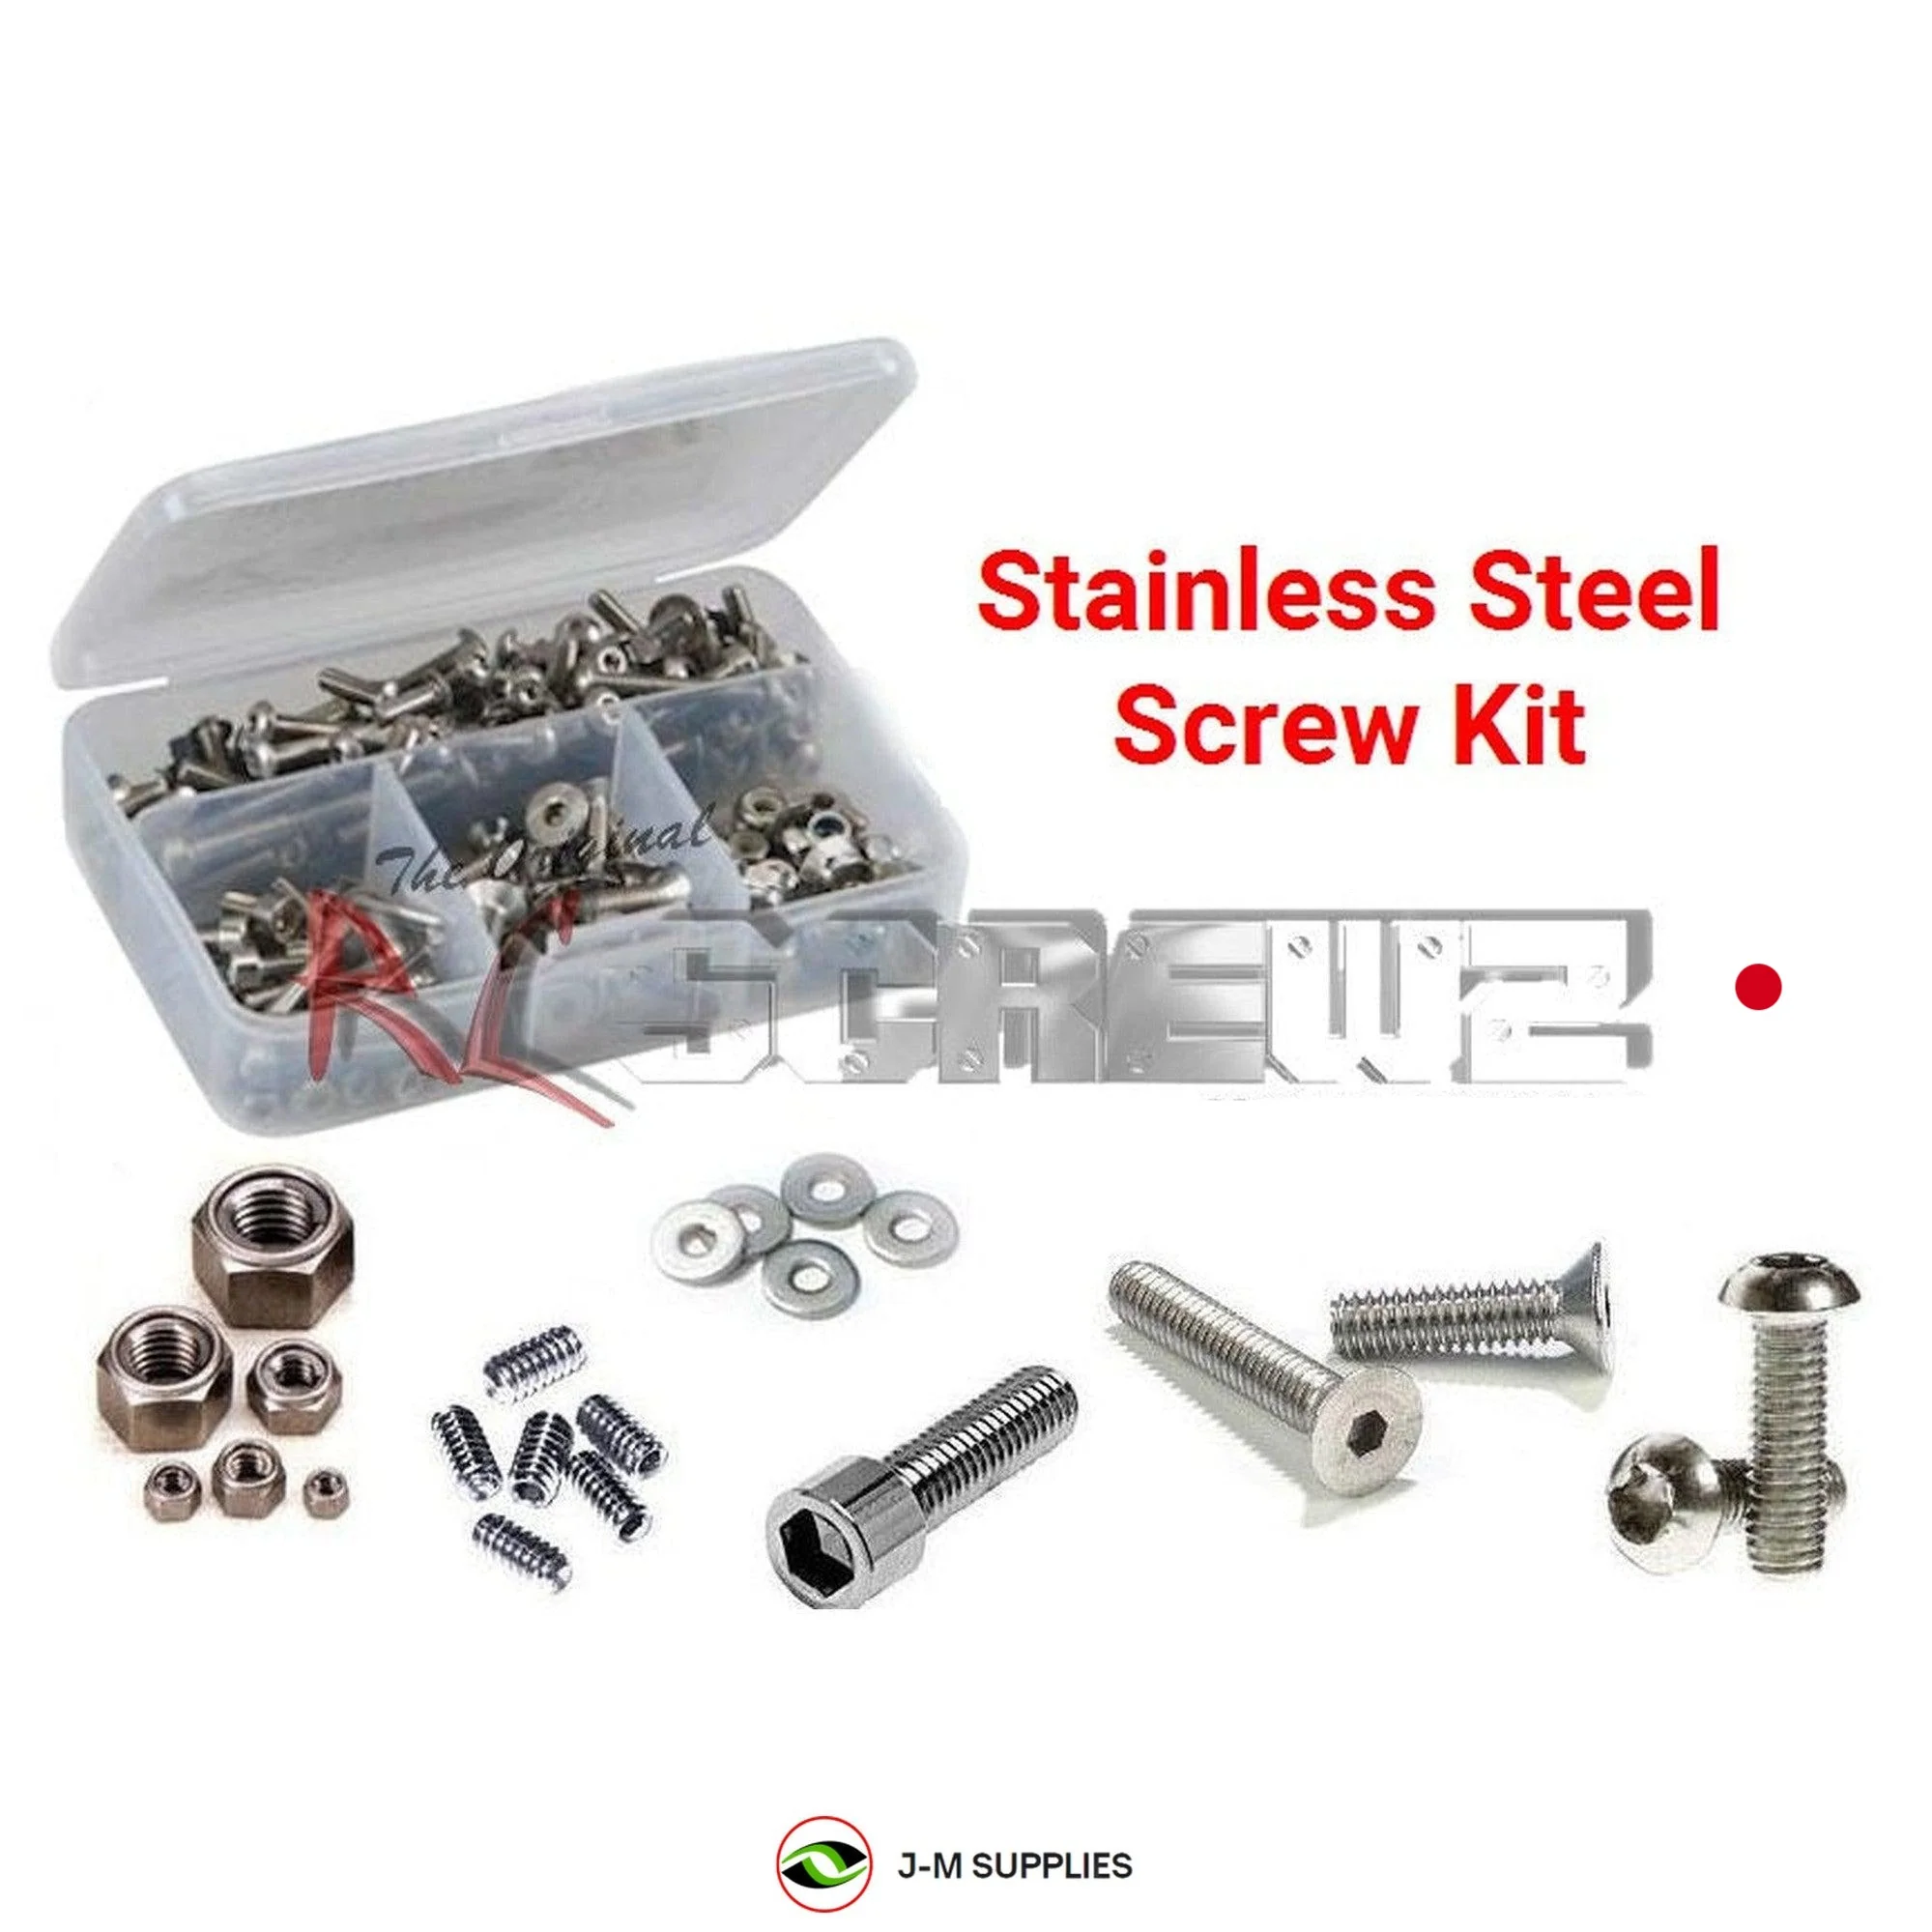 RCScrewZ Stainless Steel Screw Kit ftx024 for FTX Outback Fury 4�4 Trail Crawler - Picture 1 of 12